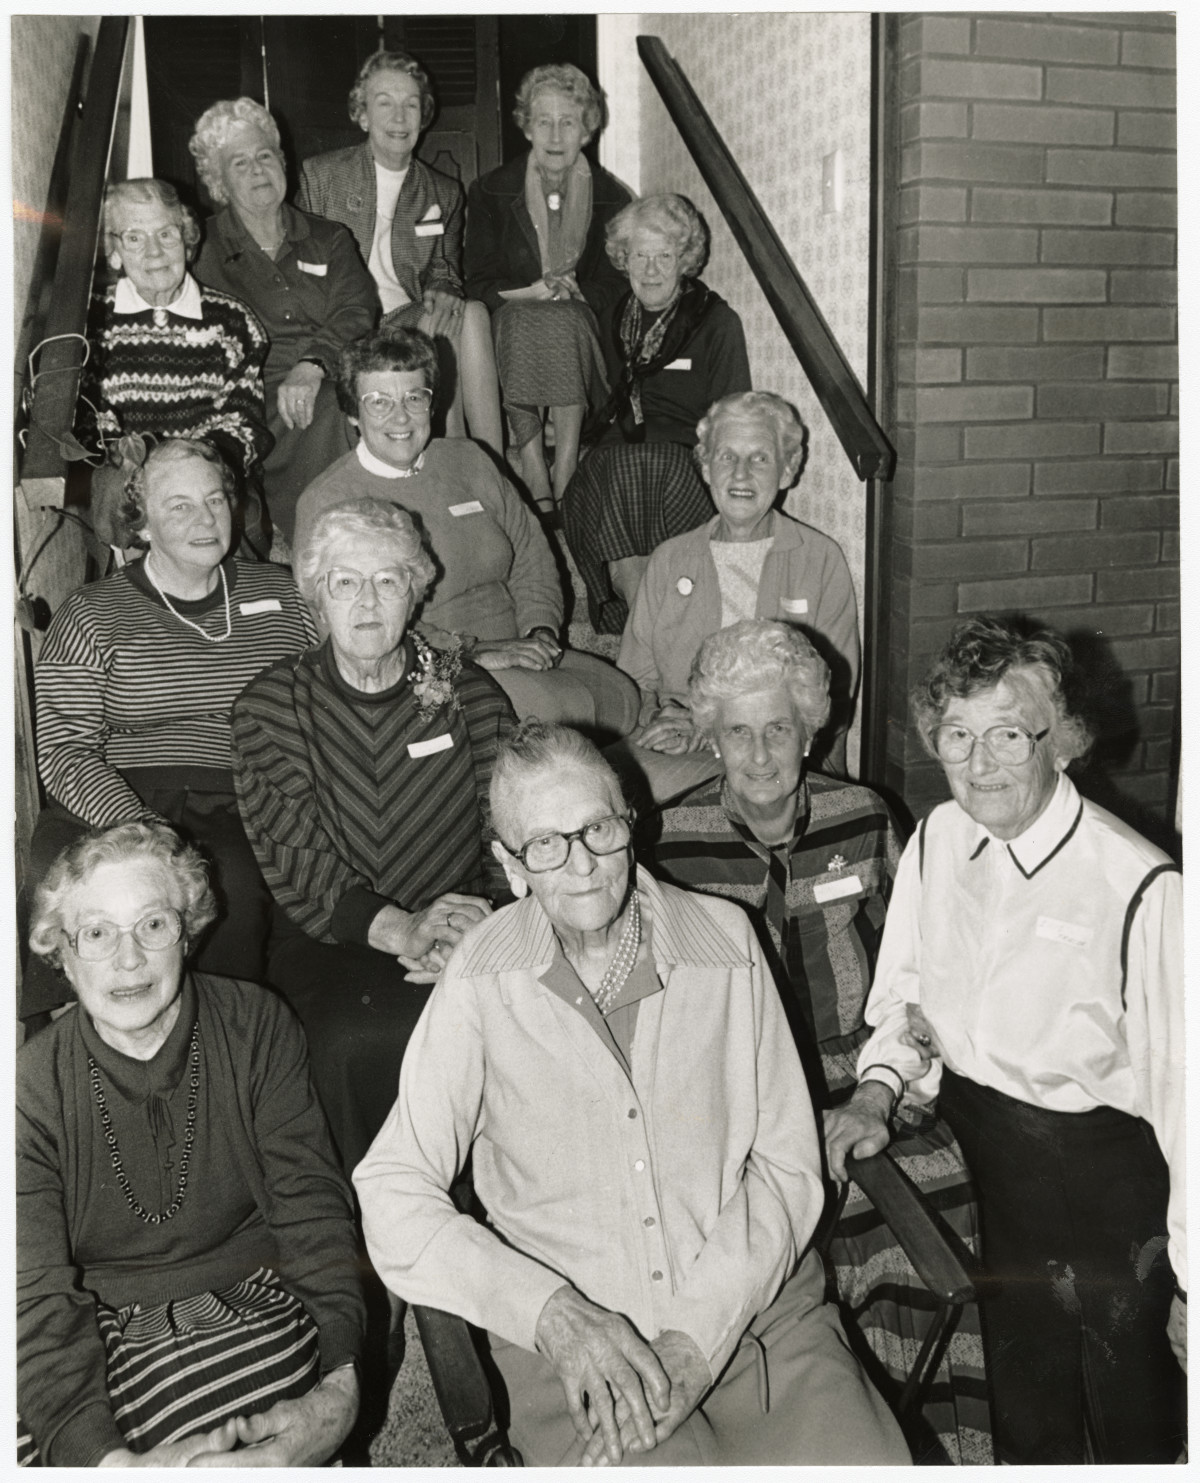 Reunion of Miss Sparkes staff, 4 June 1990. Christchurch Star archive. In copyright. CCL-StarP-02247A. A group of former employees of Miss Sparkes bridal shop celebrating a reunion. All the women had worked at Miss Sparkes in Armagh Street during the years 1932 to 1946. Eileen Brown sitting at the front, Mrs Beryl Channings, Miss Margaret Campbell, Mrs Essie Summers, Mrs Audrey Nicol, Mrs Frances Read, Mrs Isla Boanas, Mrs Iris Clarke, Mrs Win Reese.